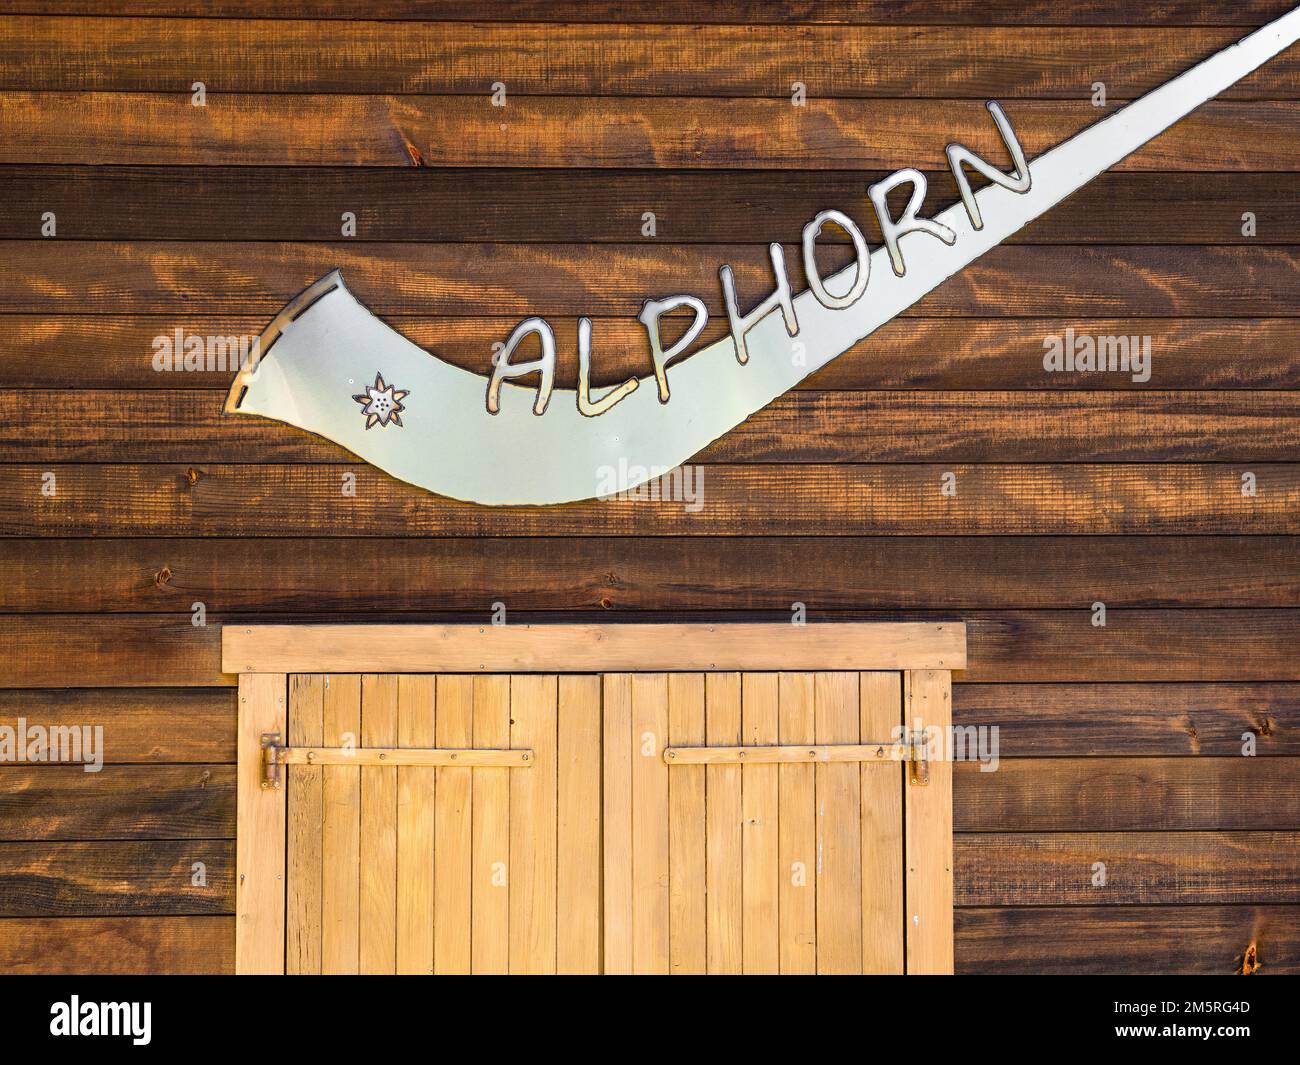 Bettmeralp, Switzerland - July 16, 2022: Instrument alphorn or alpenhorn or alpine horn is a labrophone, consisting of a straight several meter long w Stock Photo